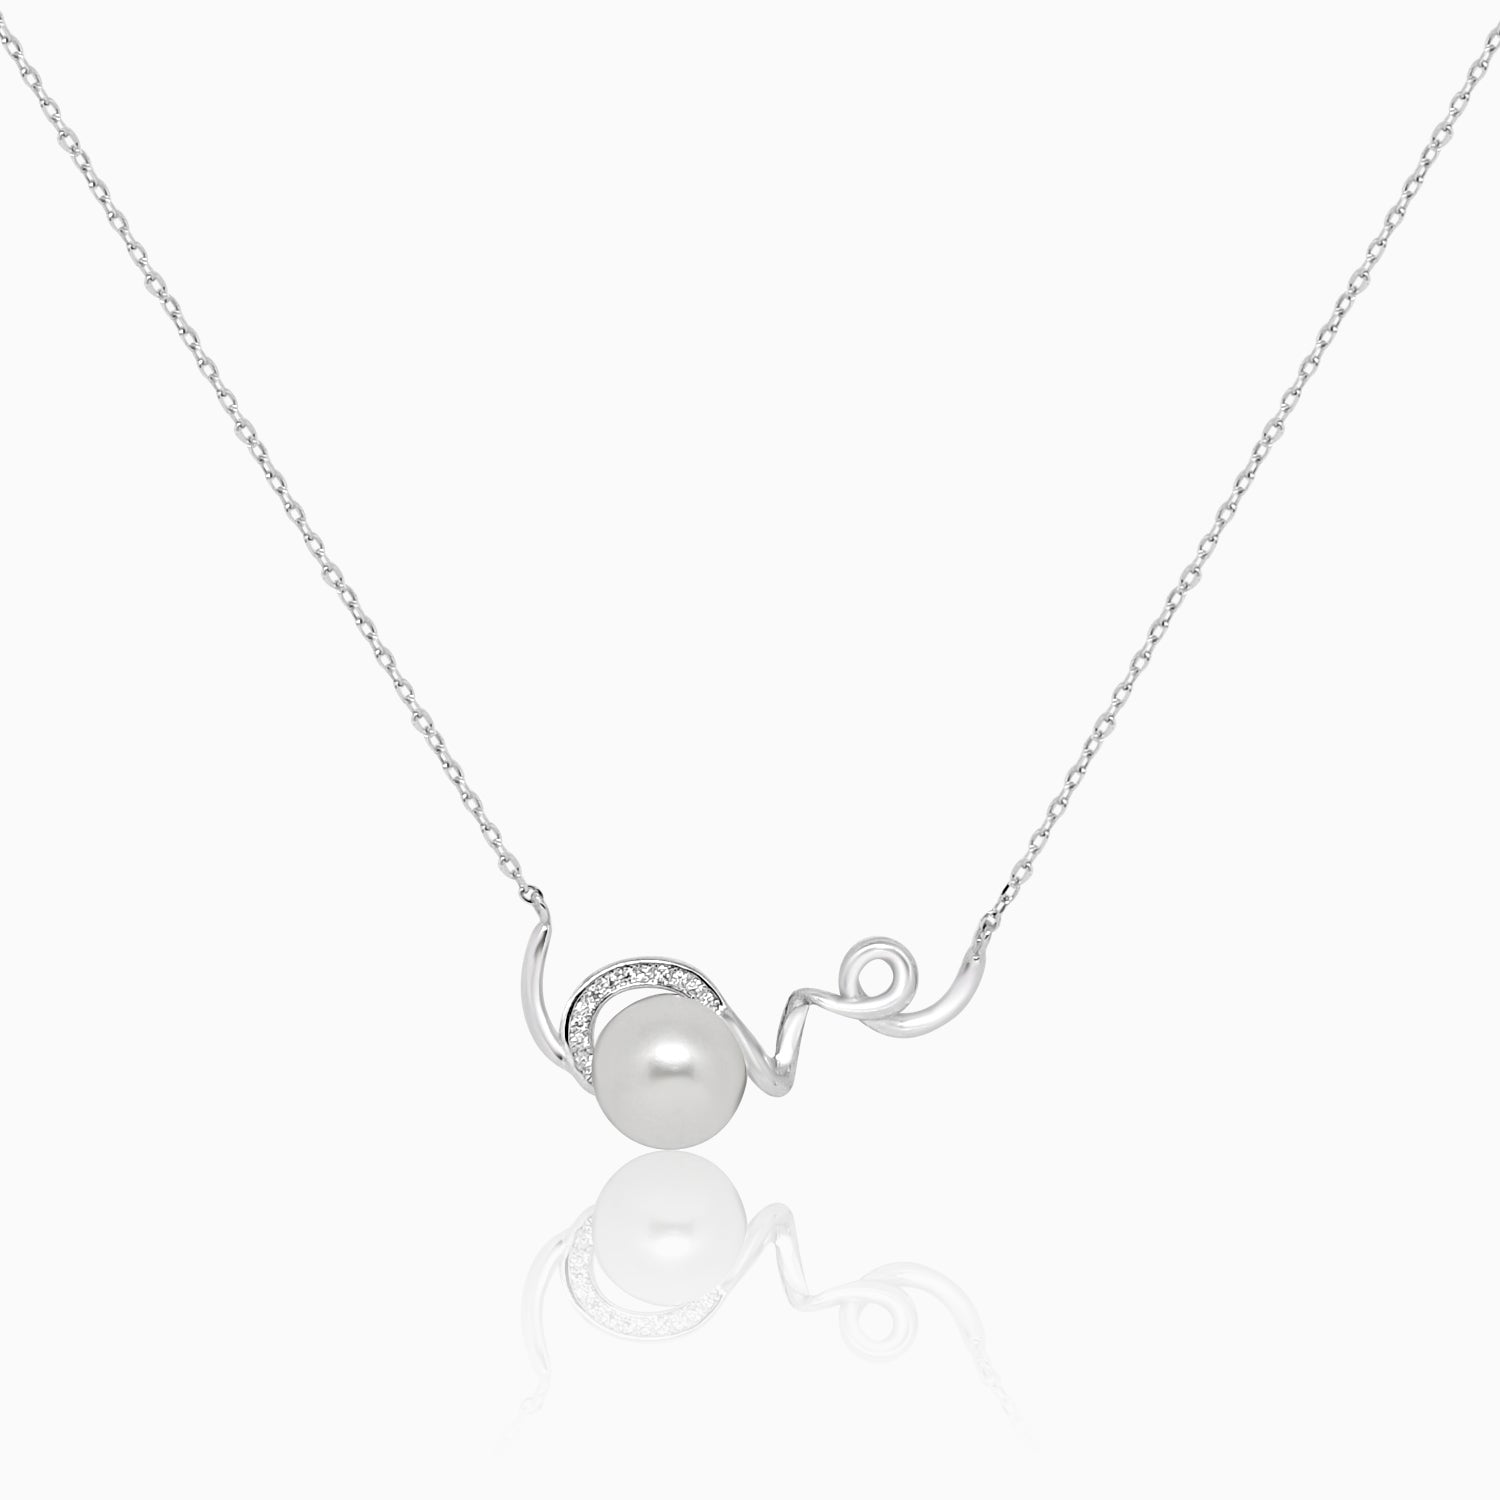 Silver Twirl Pearl Necklace